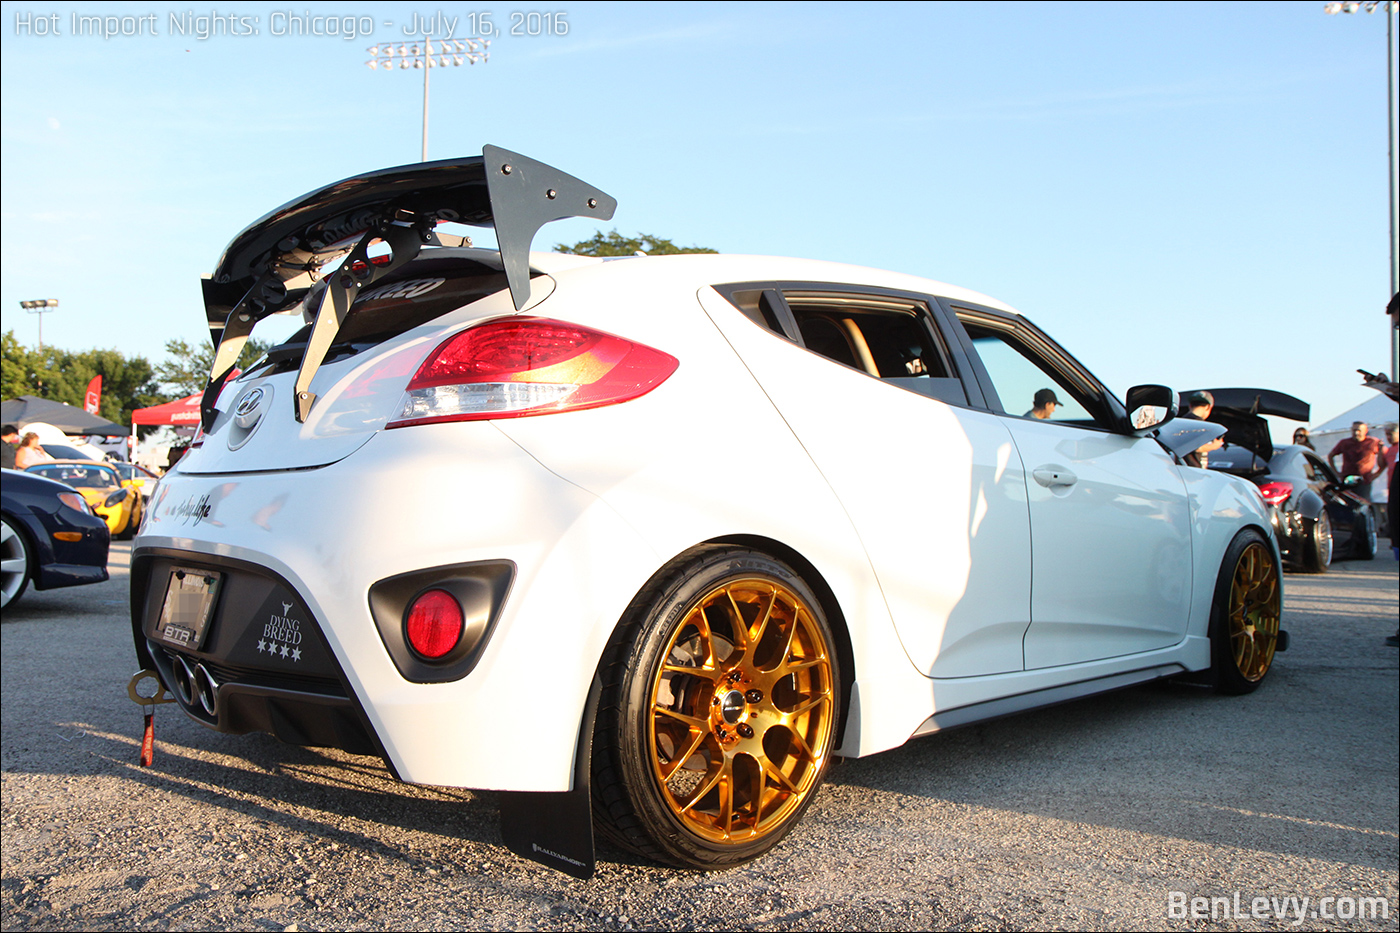 White 2013 Hyundai Veloster 1.6 Turbo with Avante Garde M310 Wheels and RSW-GT Wing